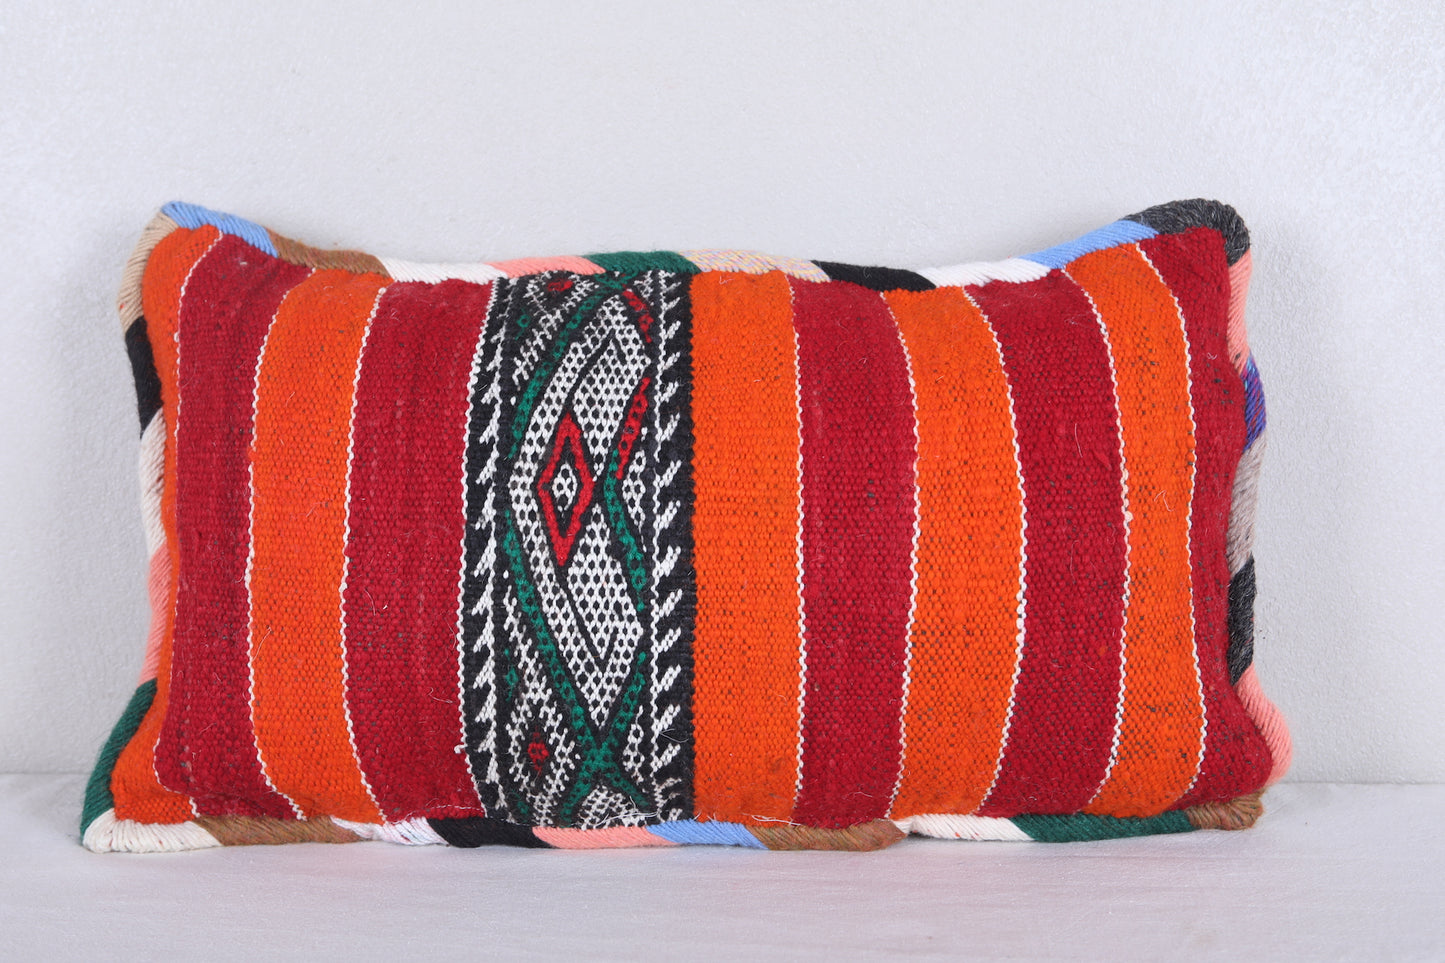 Vintage moroccan handwoven kilim pillow 13.7 INCHES X 23.6 INCHES